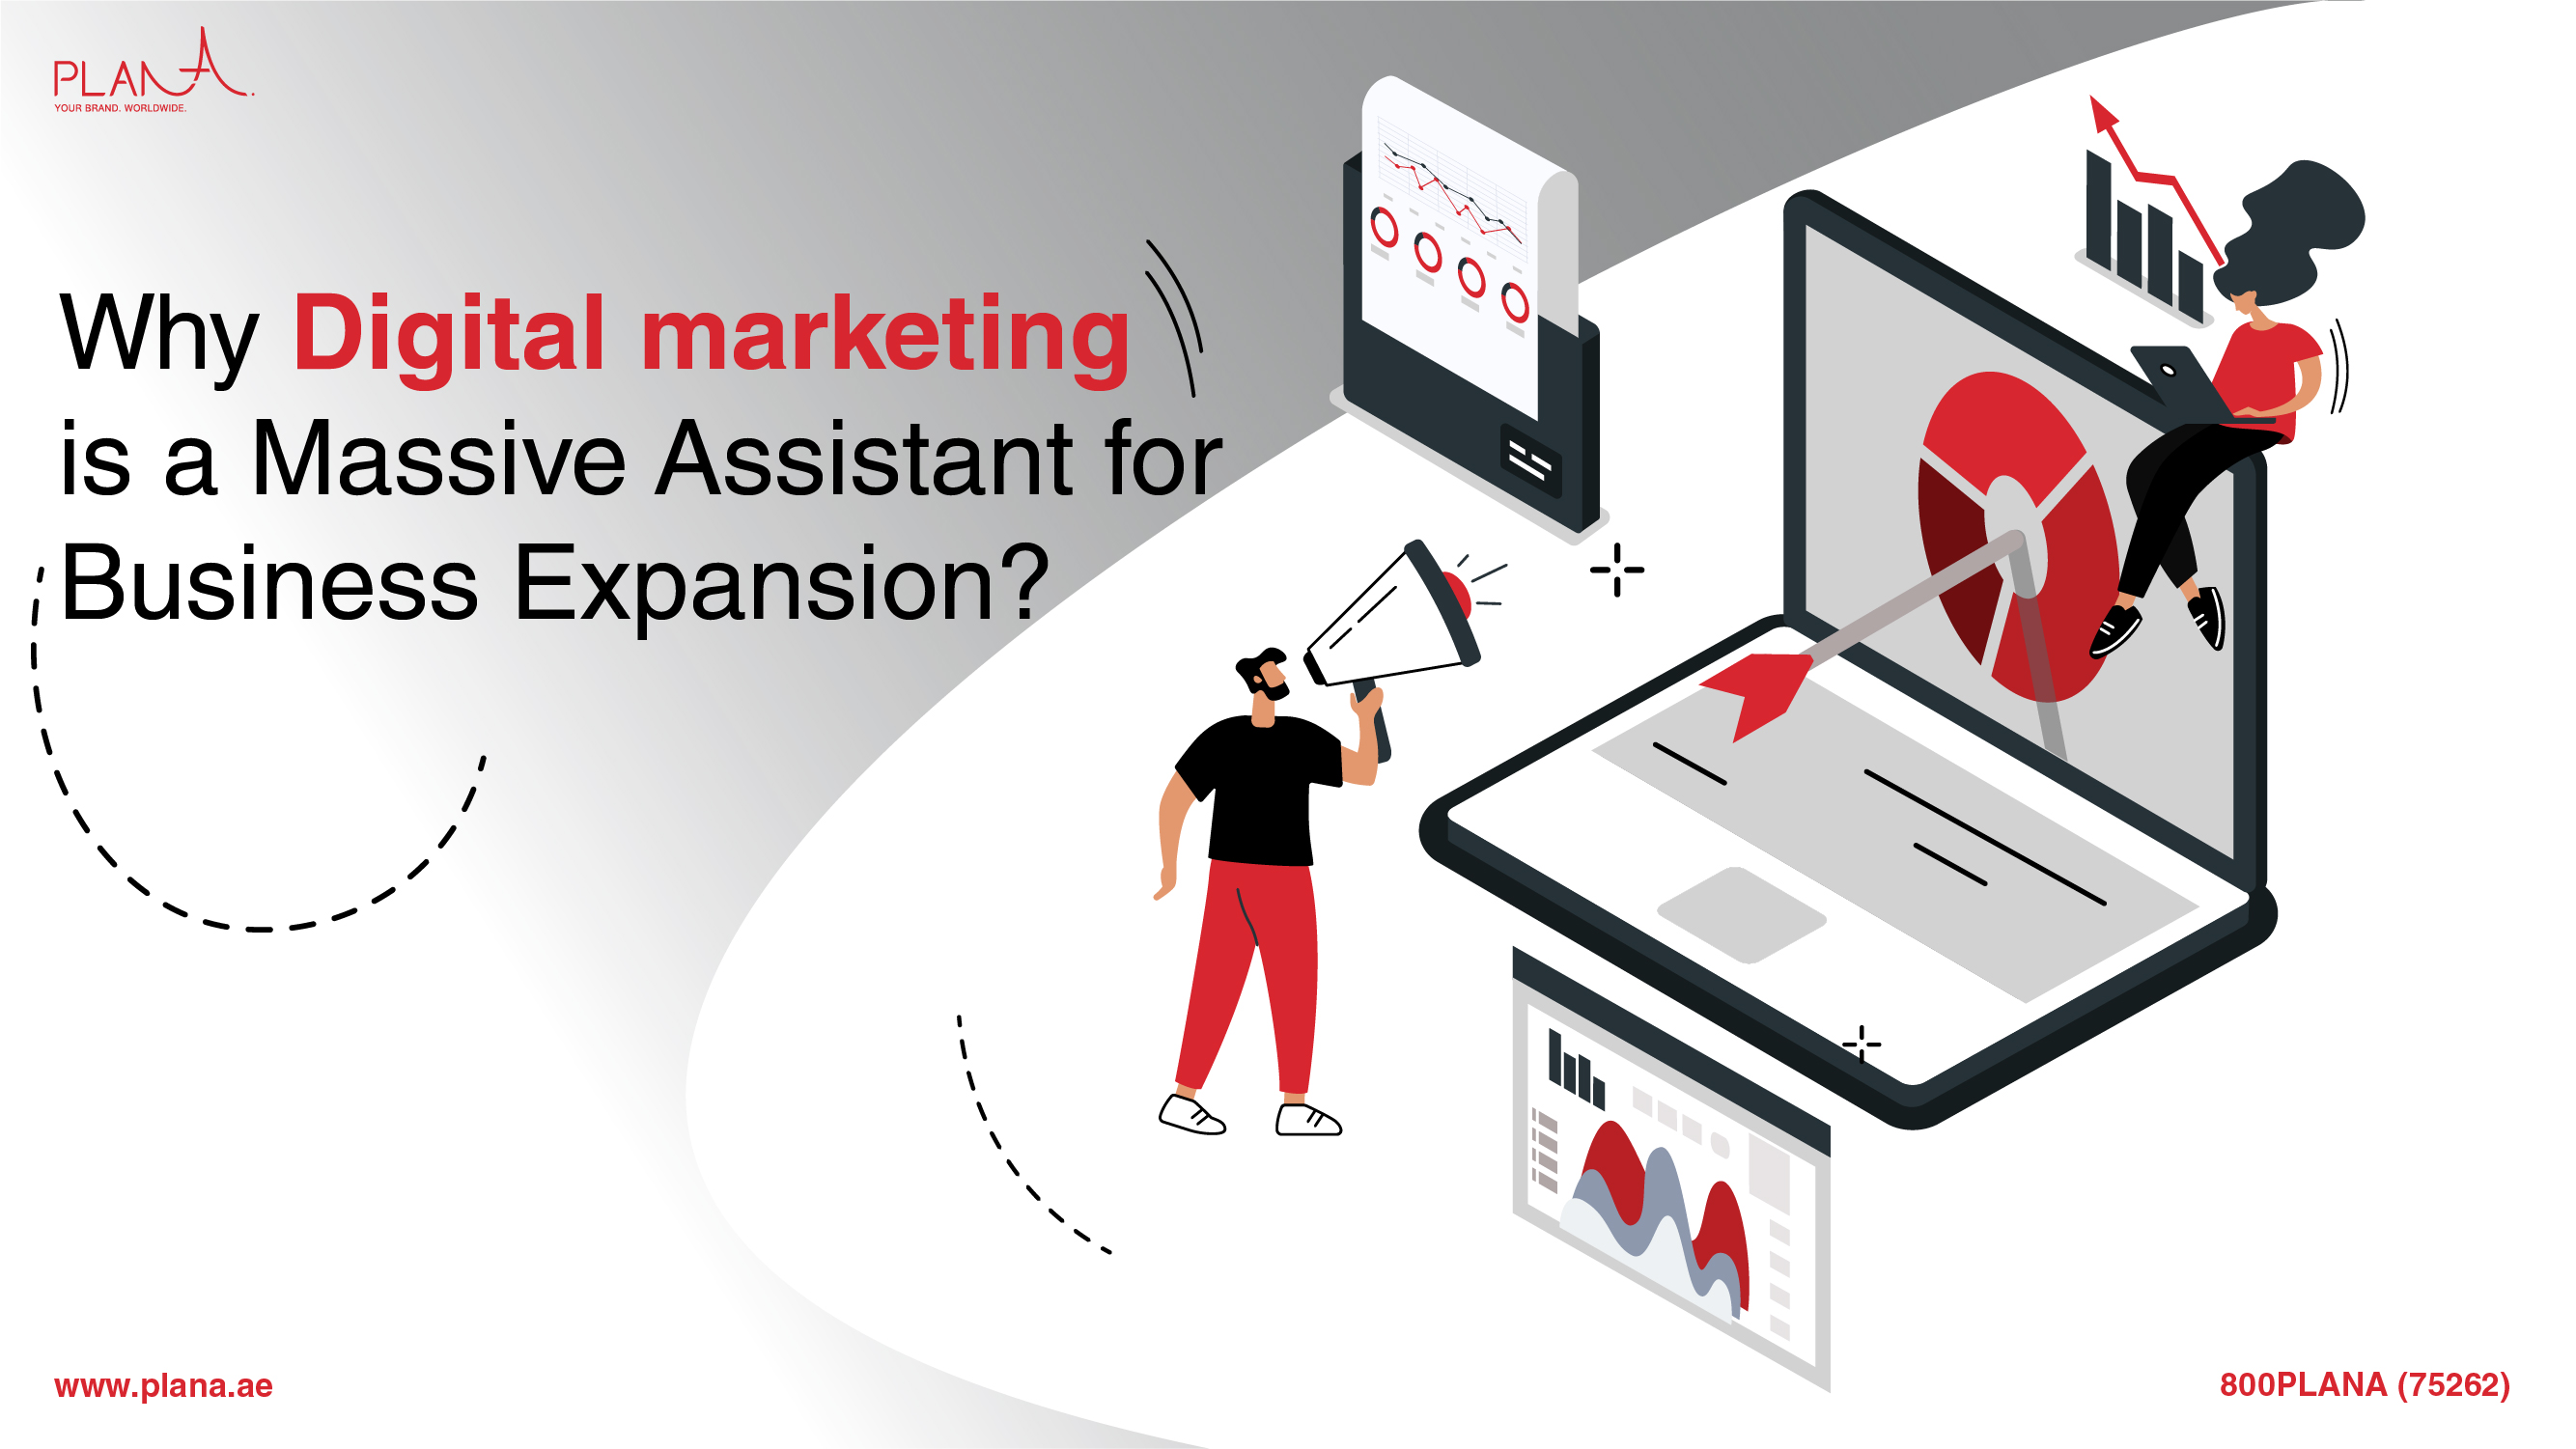 Why Digital marketing is a Massive Assistant for Business Expansion?